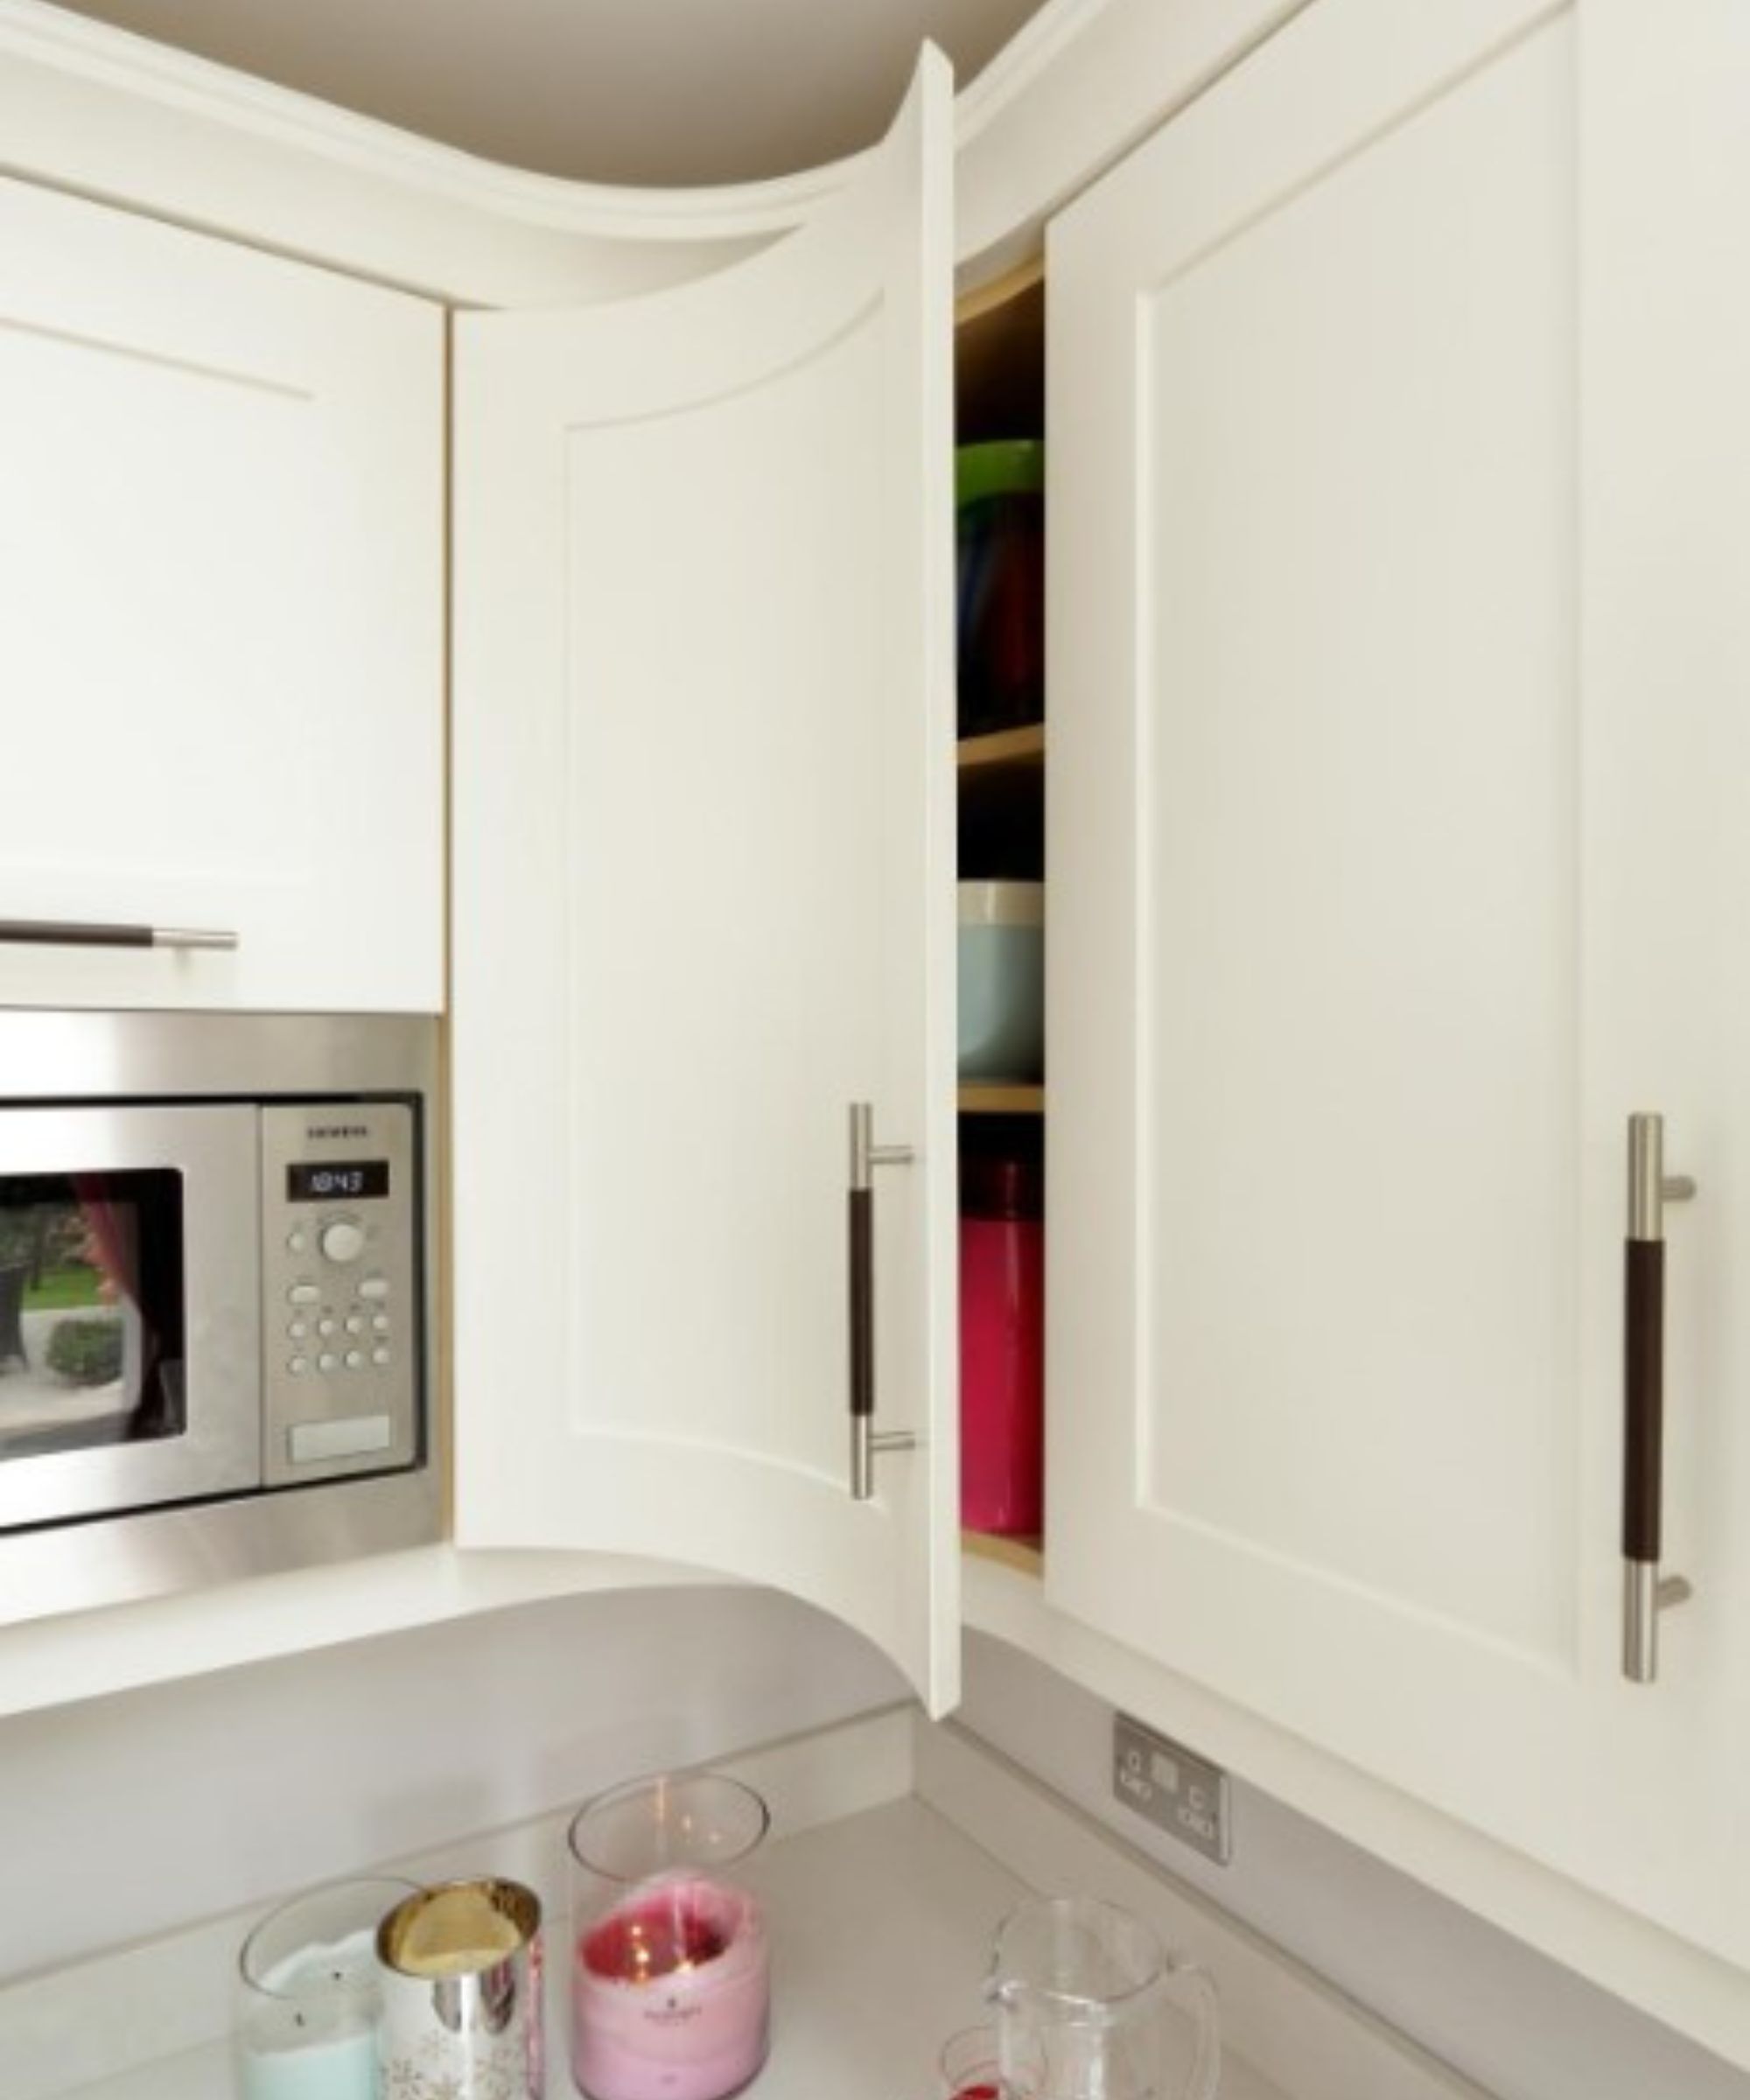 A white curved corner kitchen cabinet that's slightly ajar, with a silver built-in microwave next to it and a white countertop with pink and blue candles underneath it